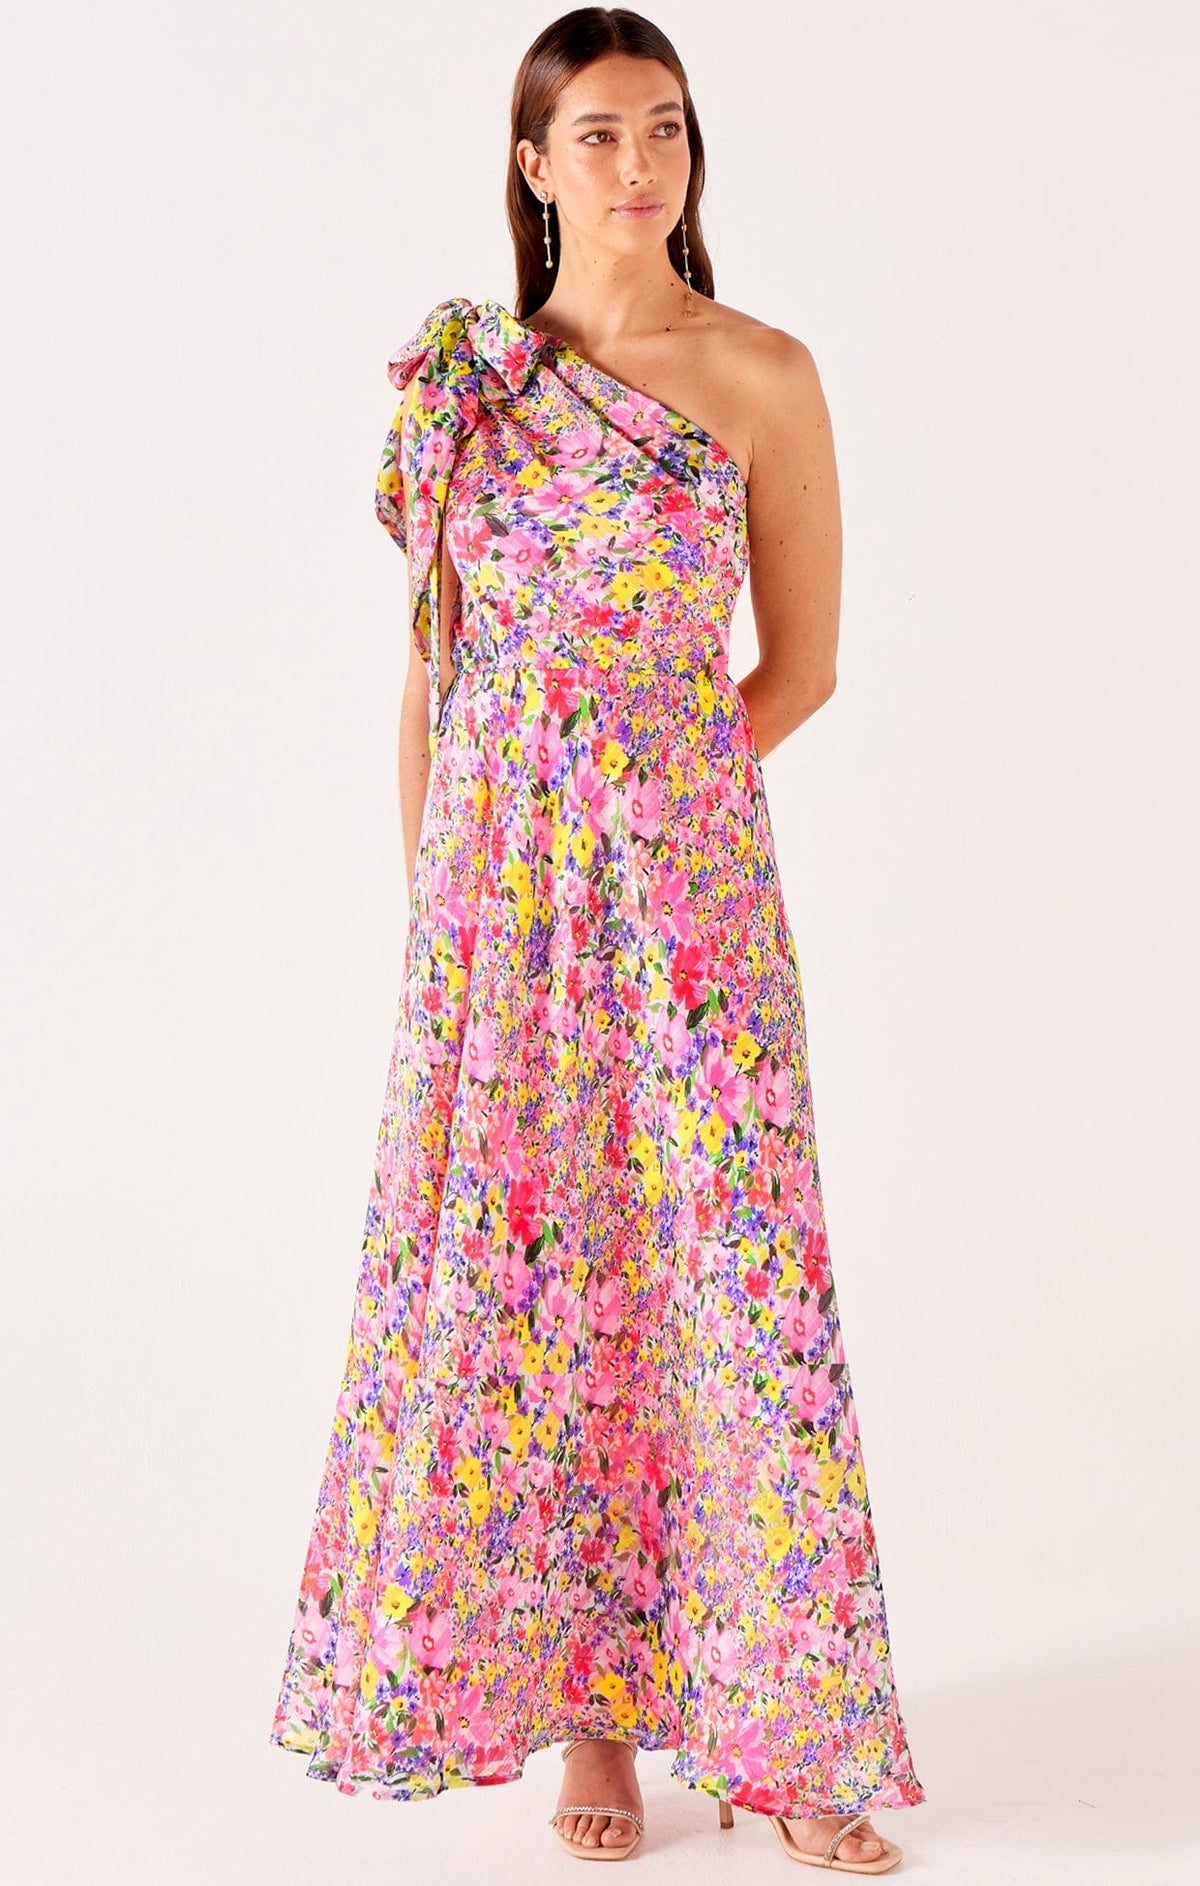 Dresses Events GARDEN IN THE SKY MAXI IN PINK MULTI FLORAL